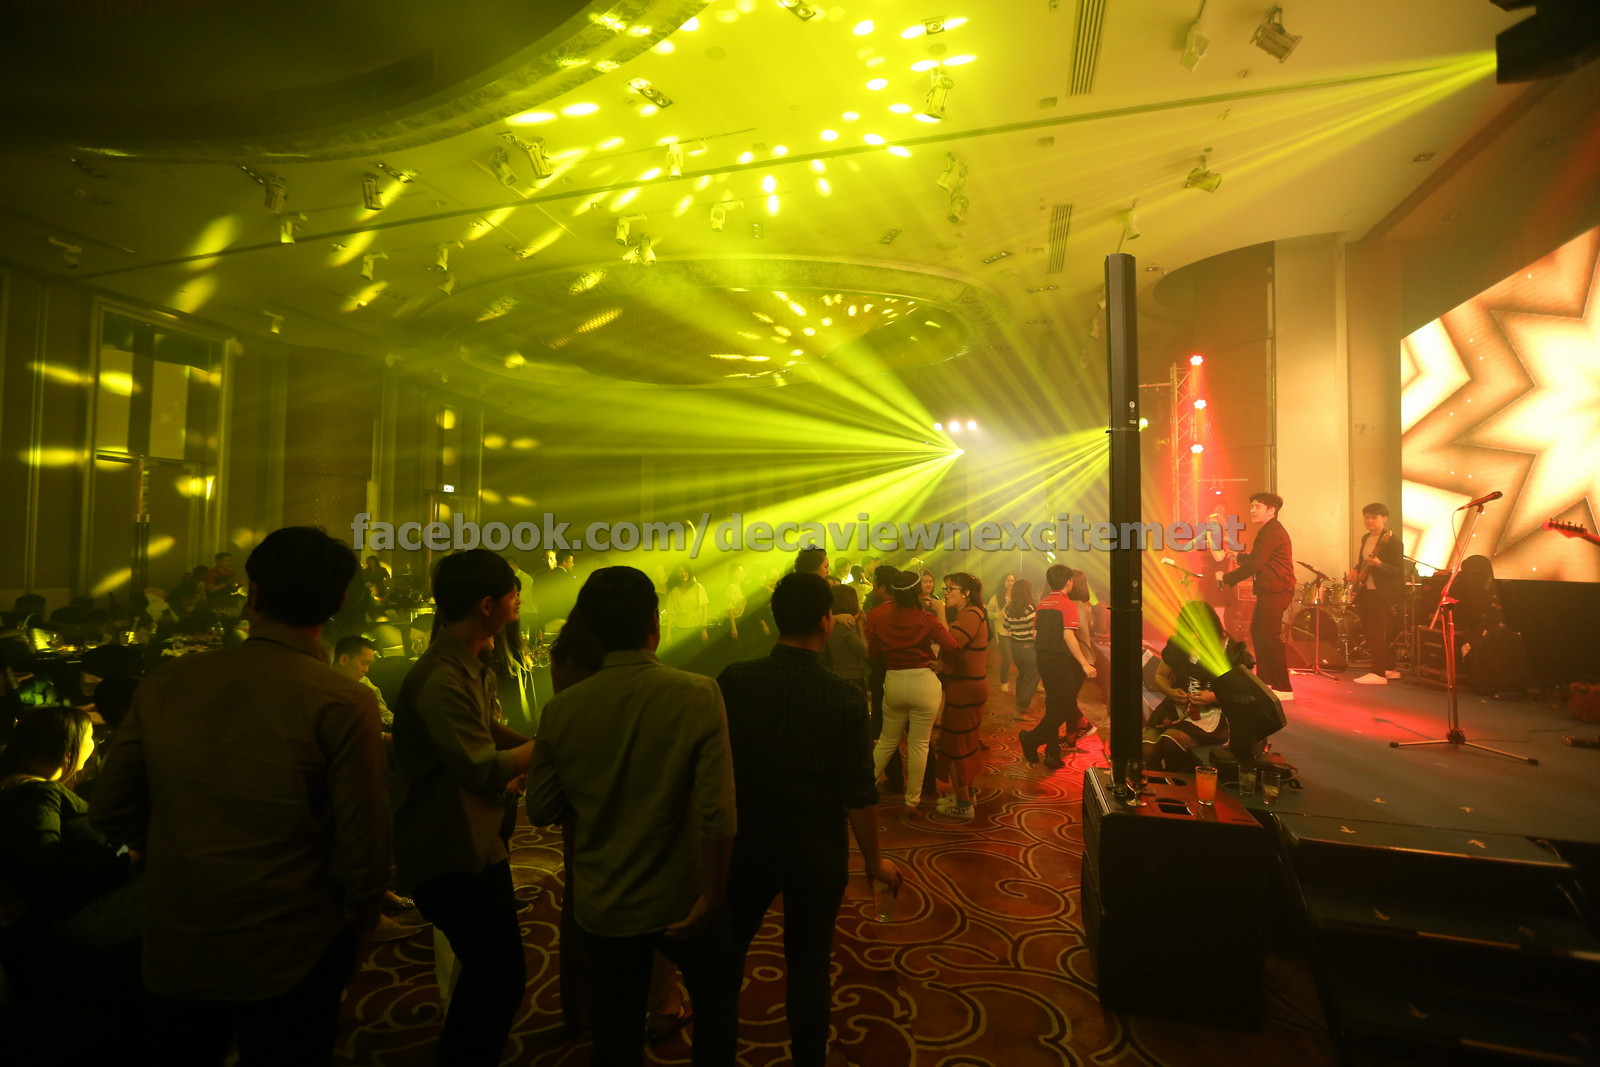 Nexcitement and Decaview manages an annual year-end party for a major Japanese autoparts company